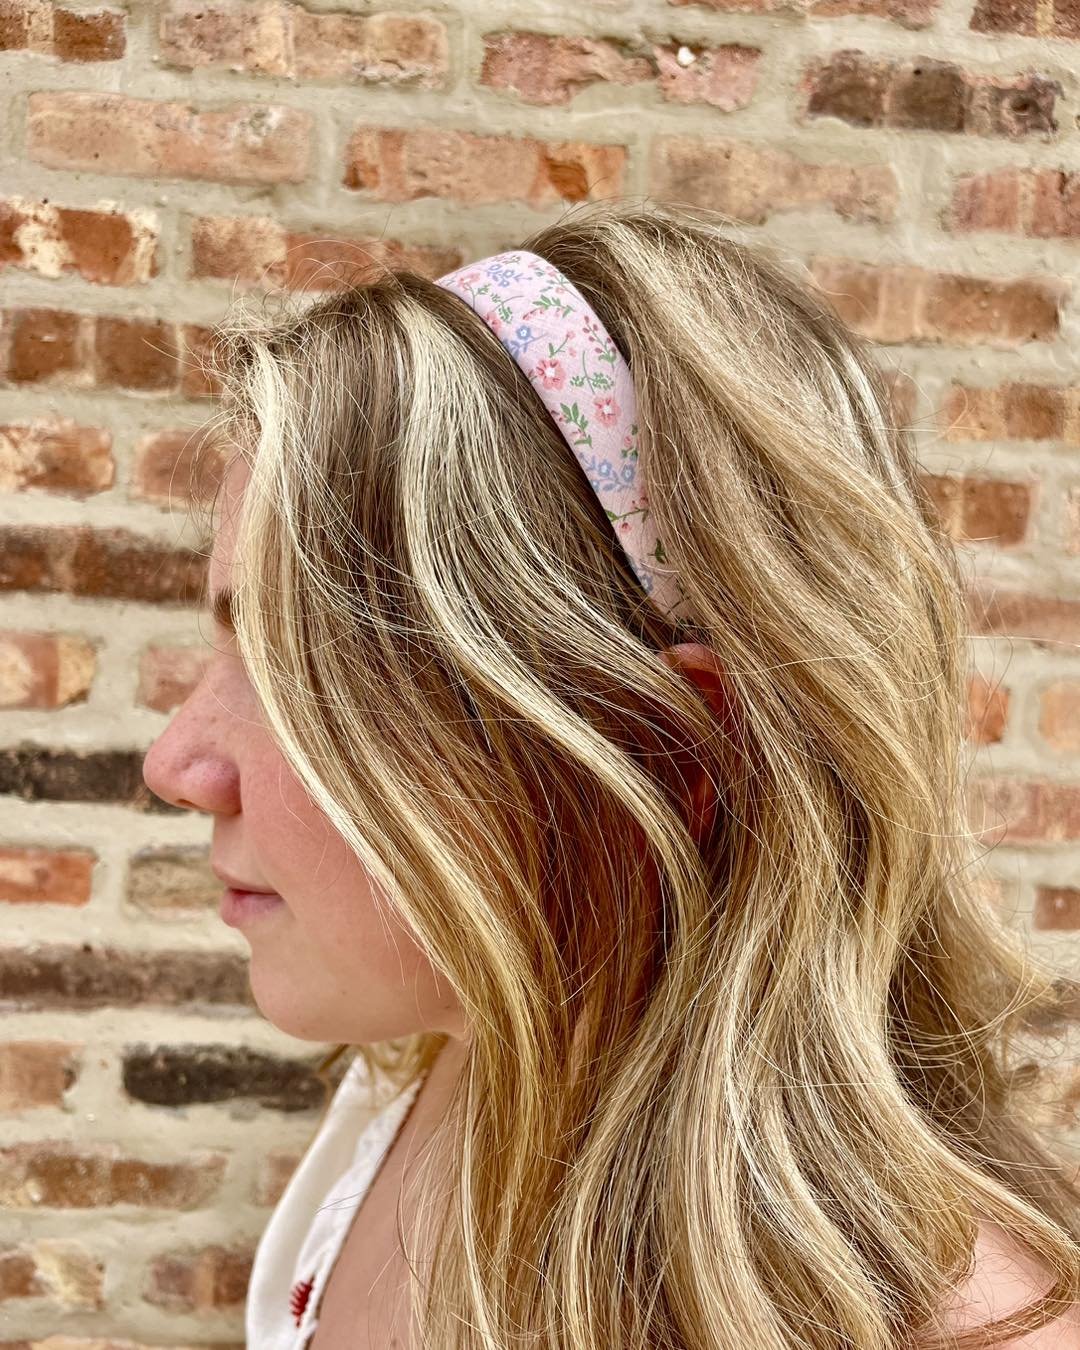 Check out these head bands!🤩

So cute and trendy! These are just SOME of the colors and styles we have for SALE this weekend!!👏 Get them for 20% OFF Friday, May 10th &amp; Saturday, May 11th!!